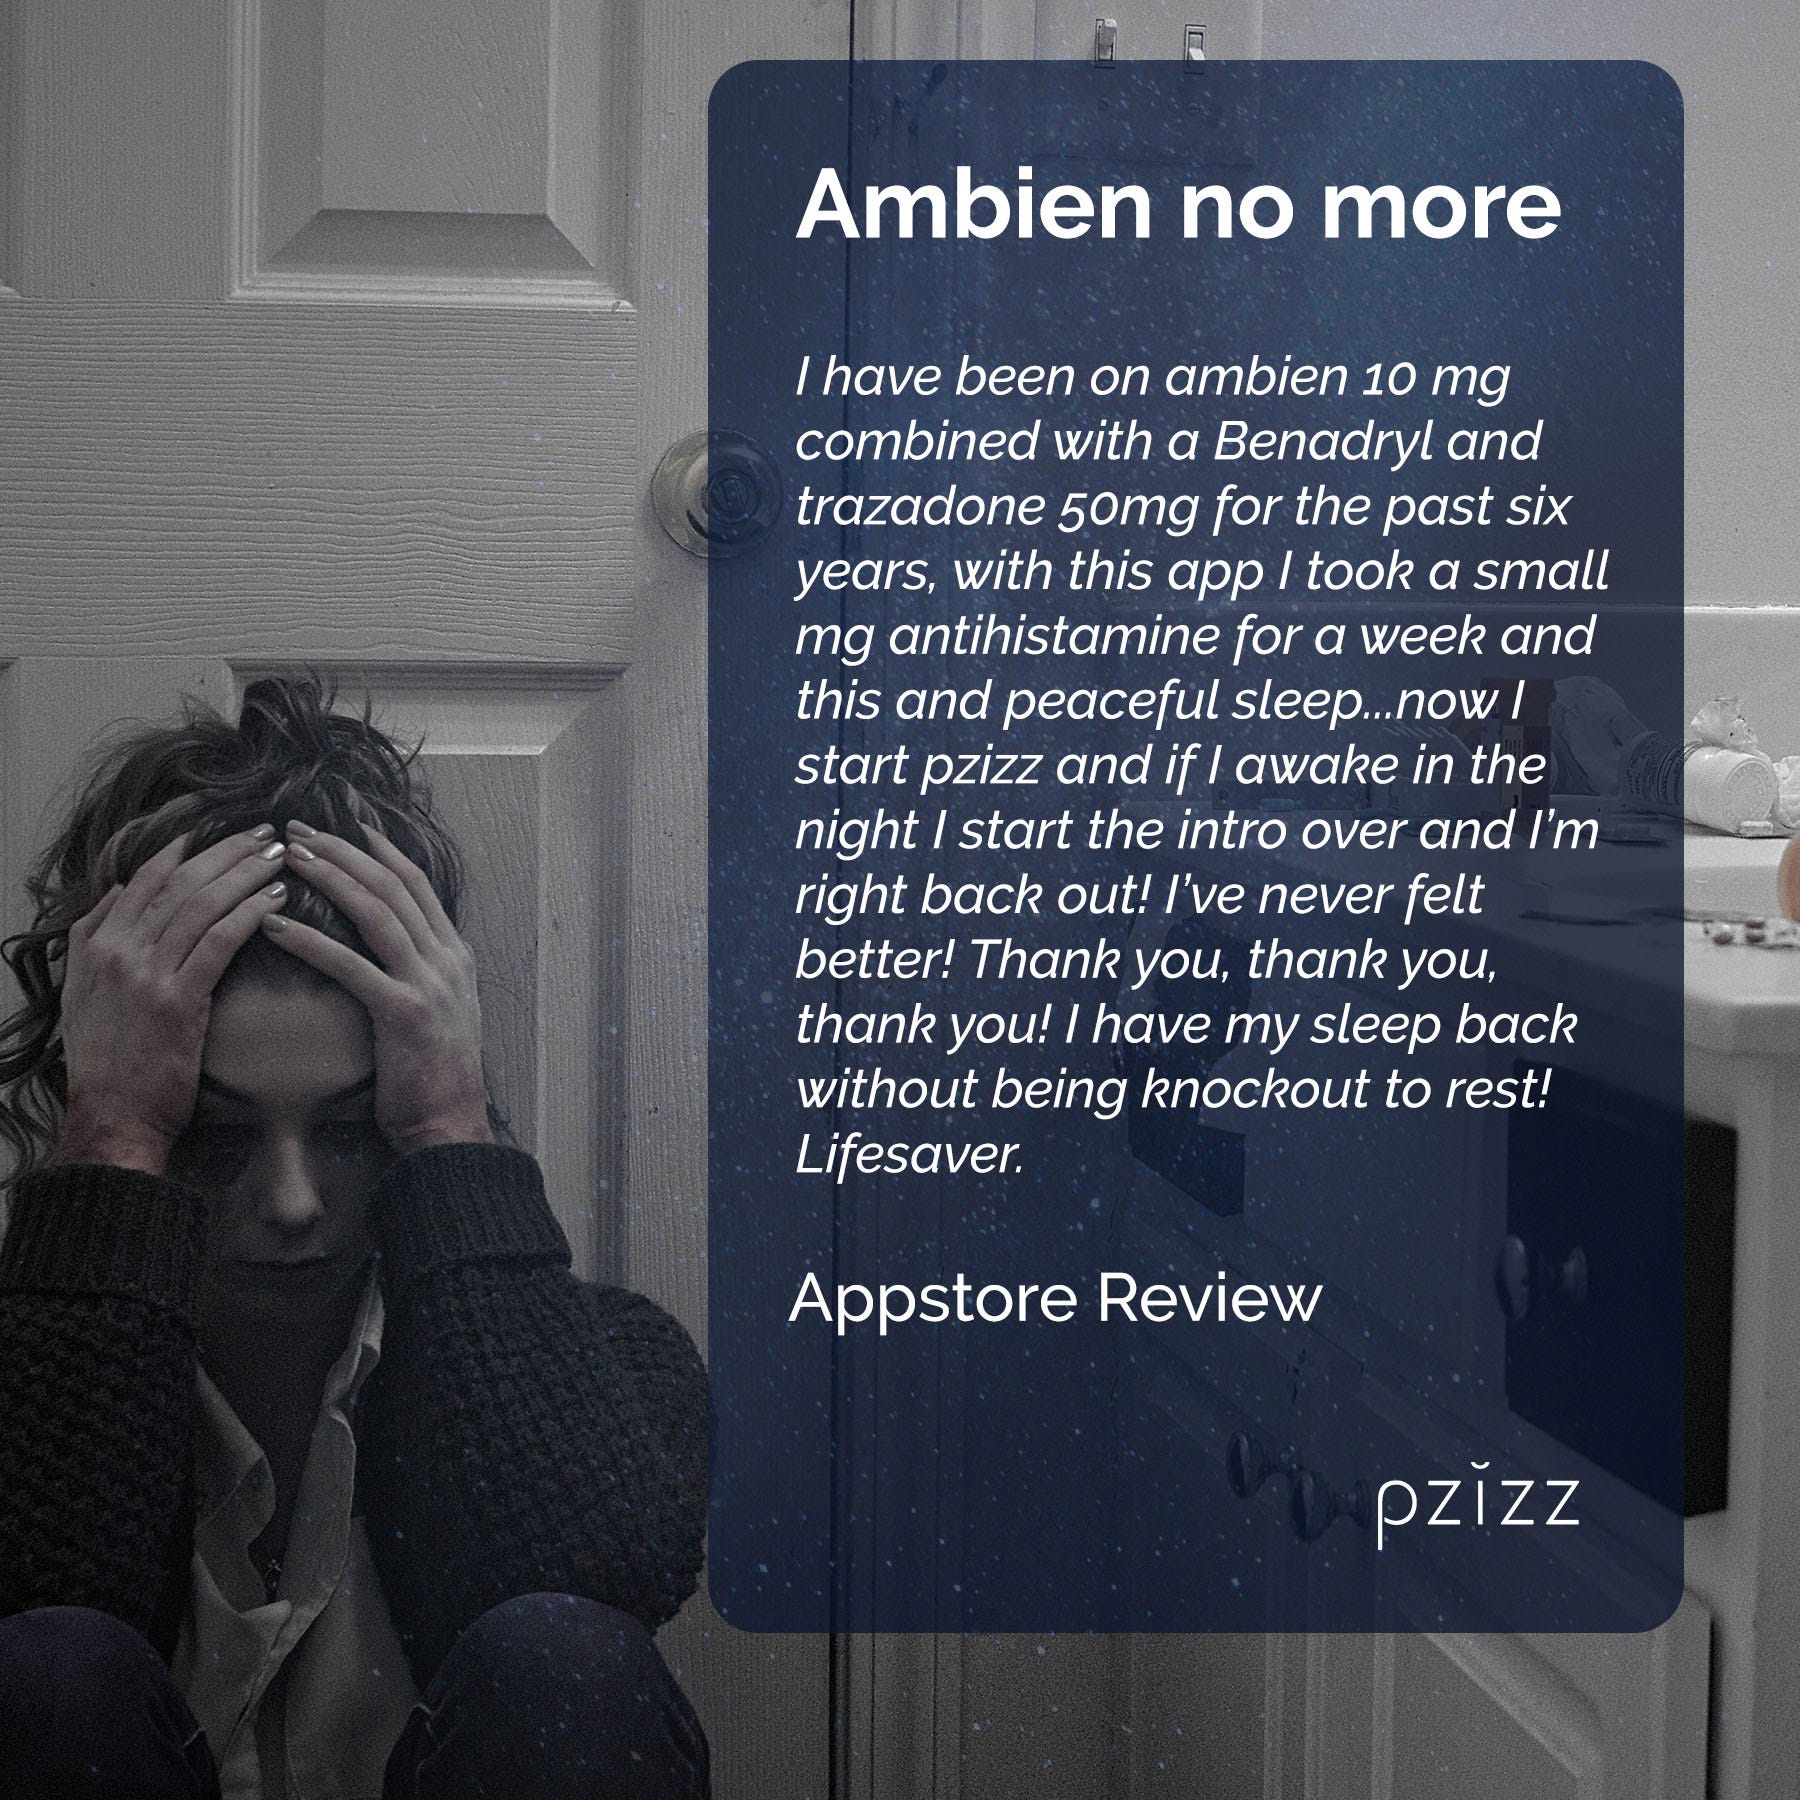 Is it safe to take ambien with benadryl